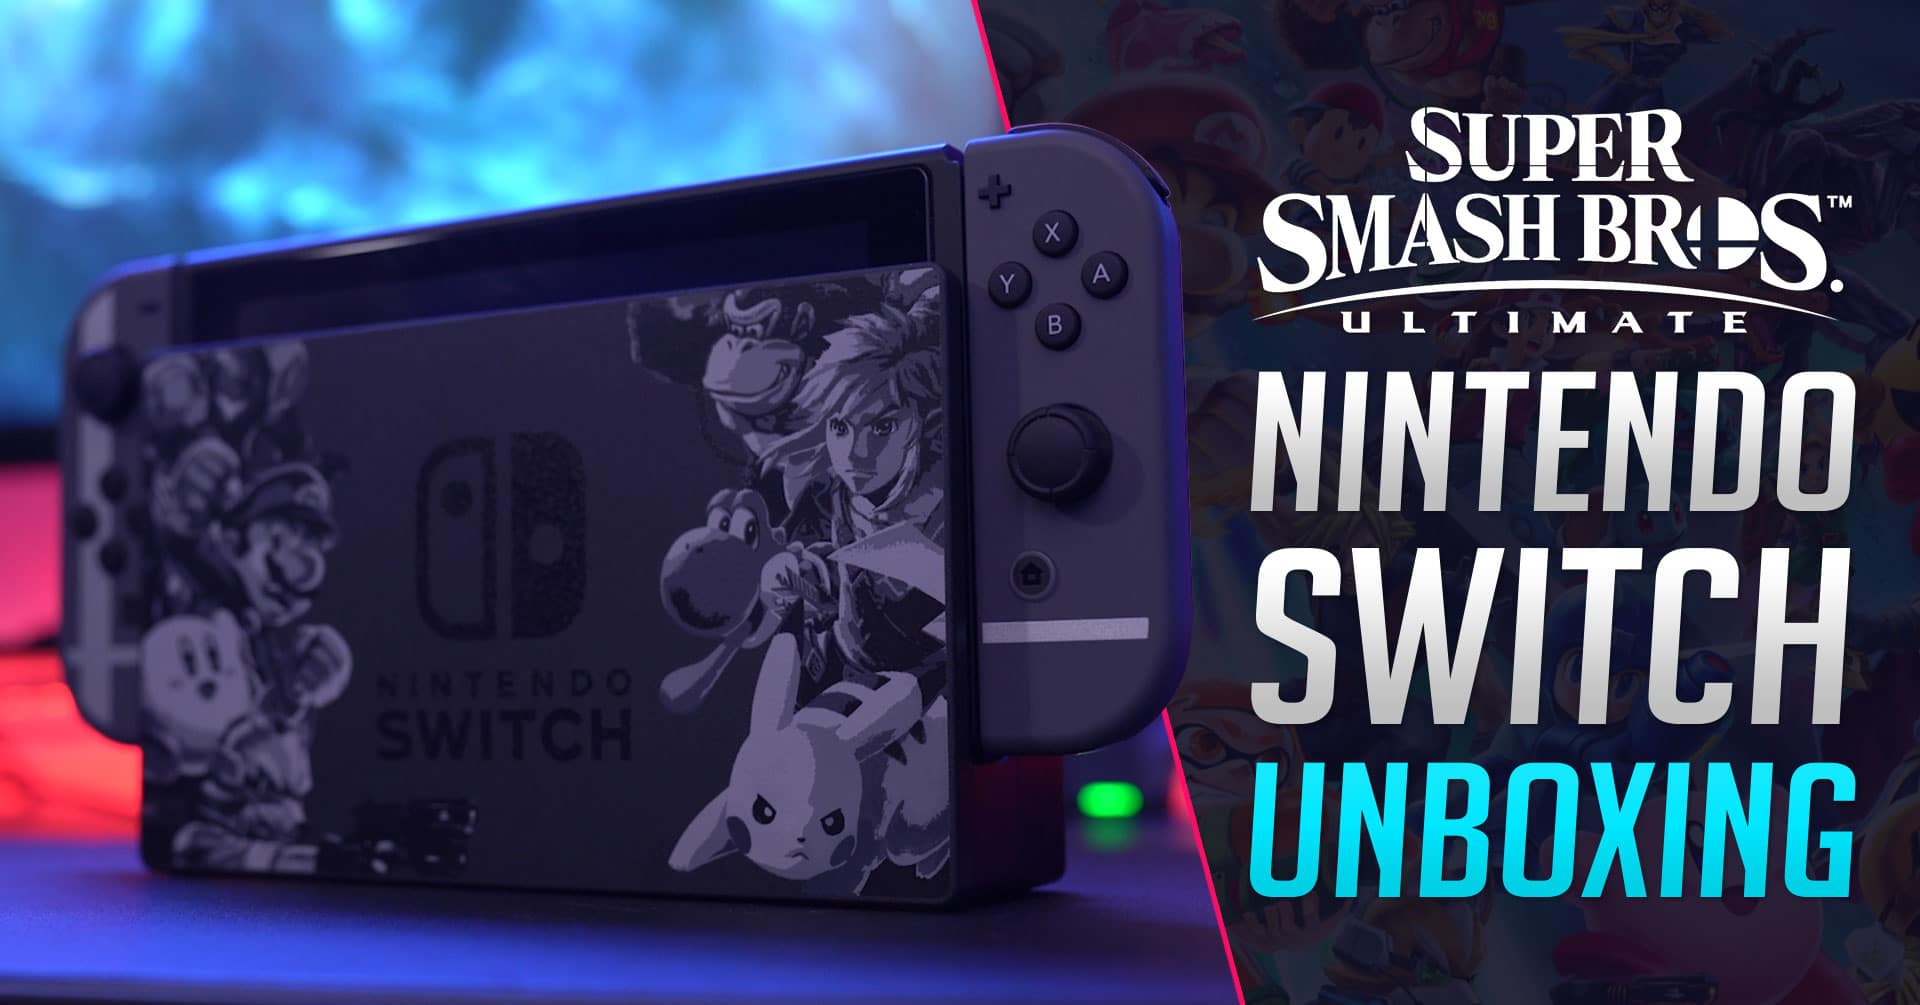 Nintendo Switch Super Smash Bros. Ultimate Edition - Unboxing & Review -  FuryPixel® | Gaming • Technology • Anime